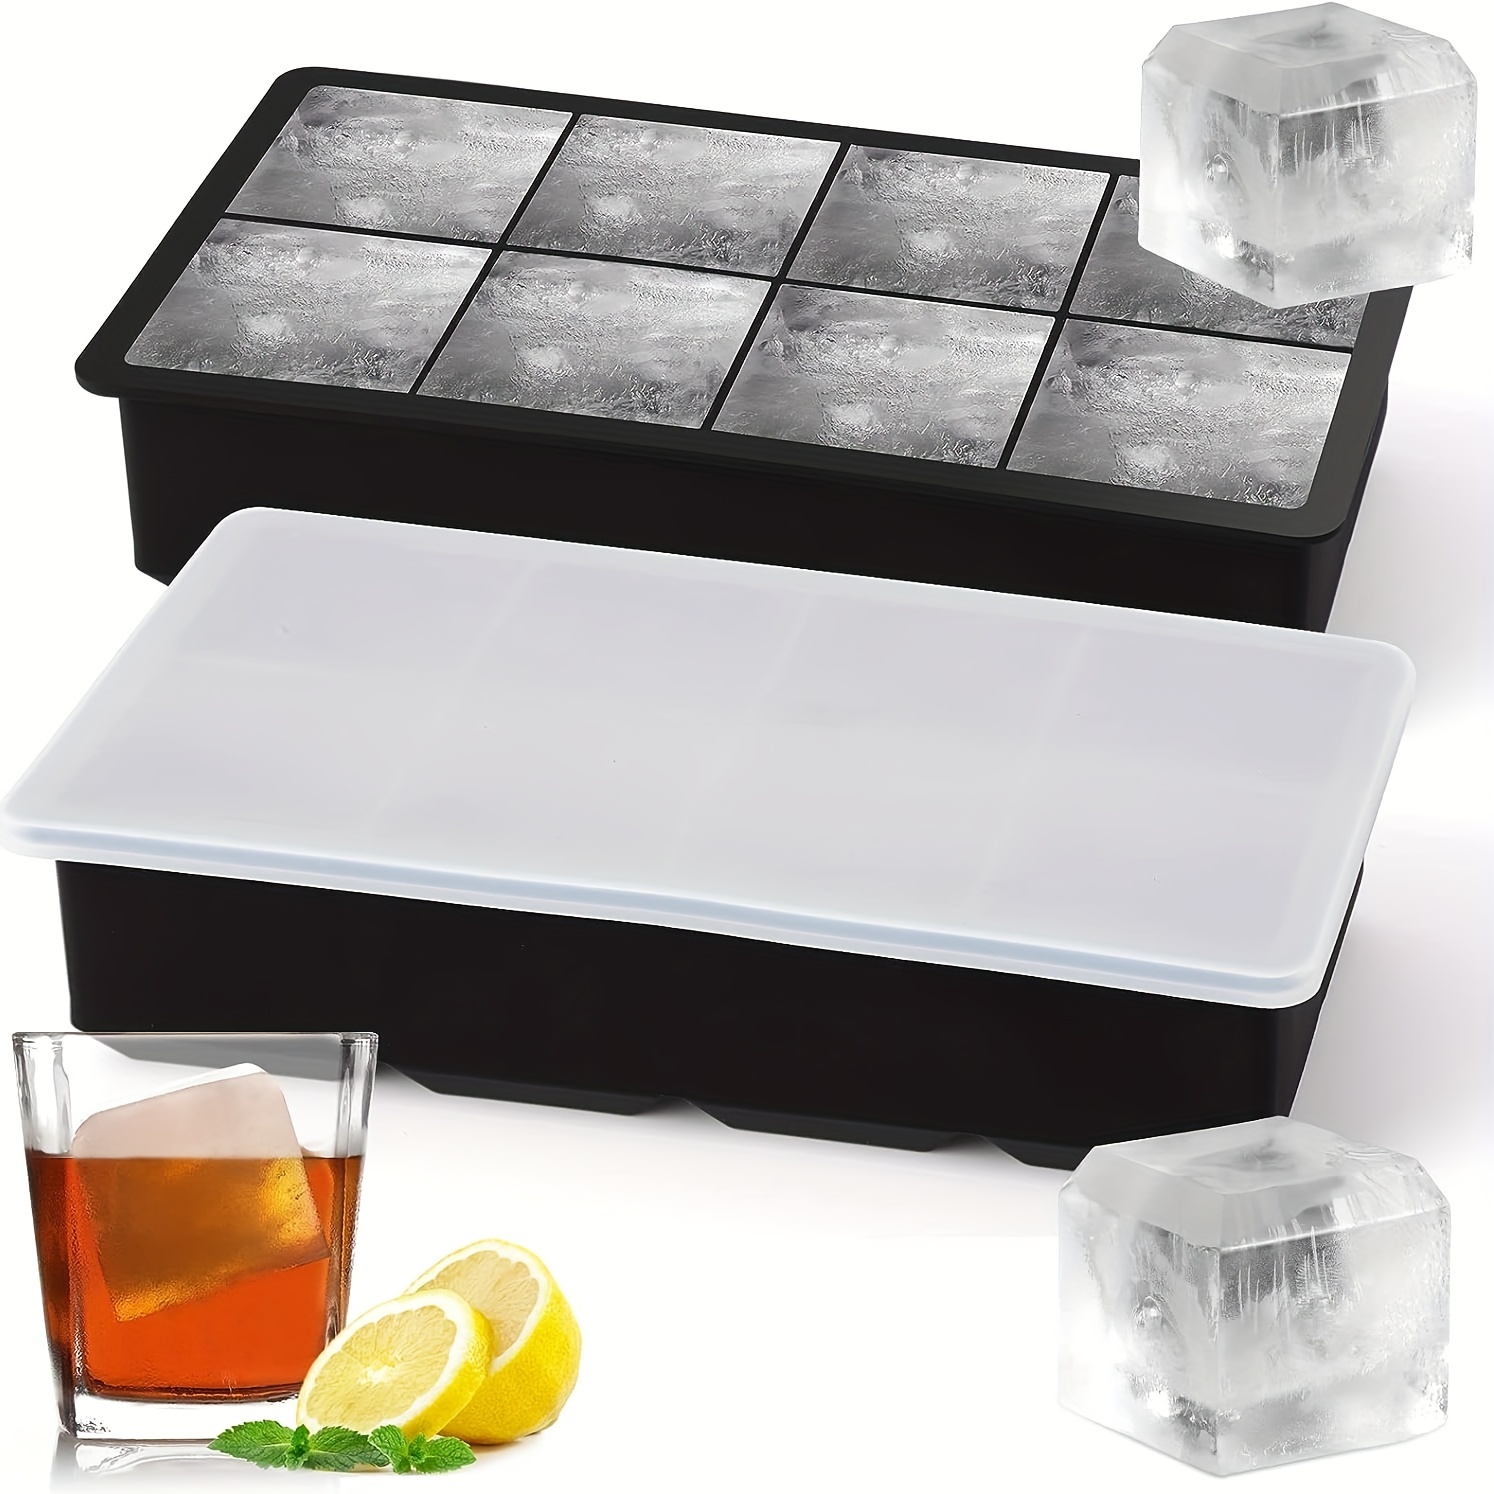 Large Ice Cube Mold With Lid, Stackable Silicone Square Ice Cube